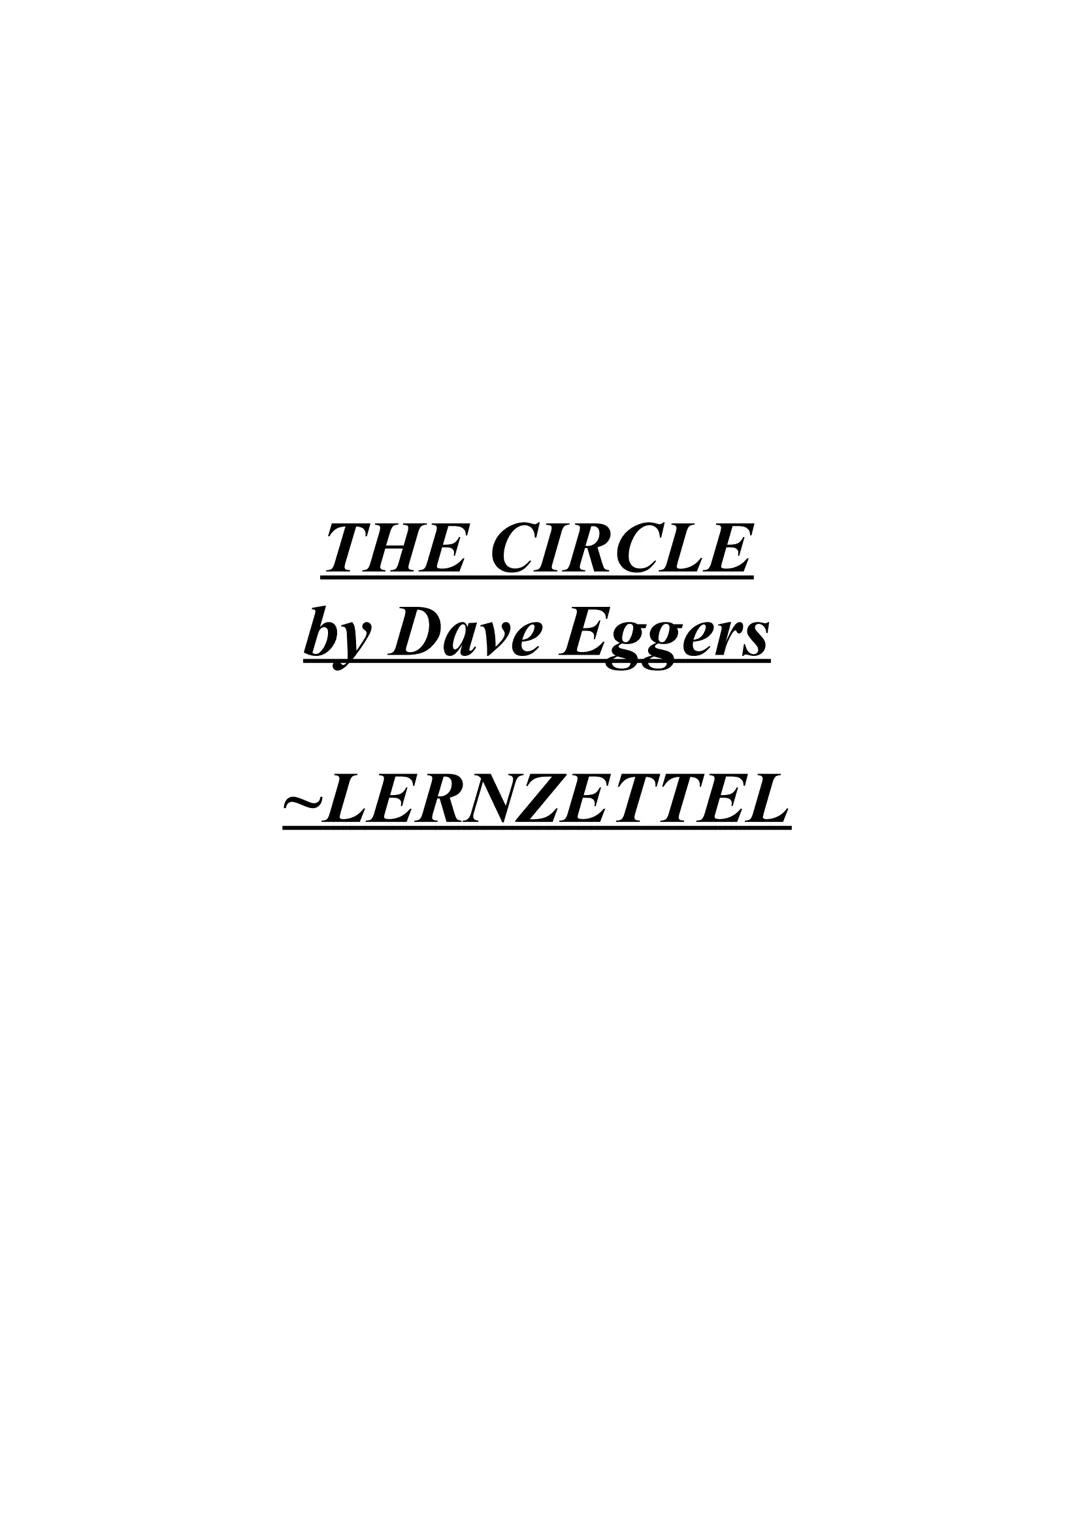 THE CIRCLE
by Dave Eggers
~LERNZETTEL Summary (kurze Zusammenfassung)
published in 2013 by Dave Eggers
dystopian novel
●
●
●
Mae Holland
●
●